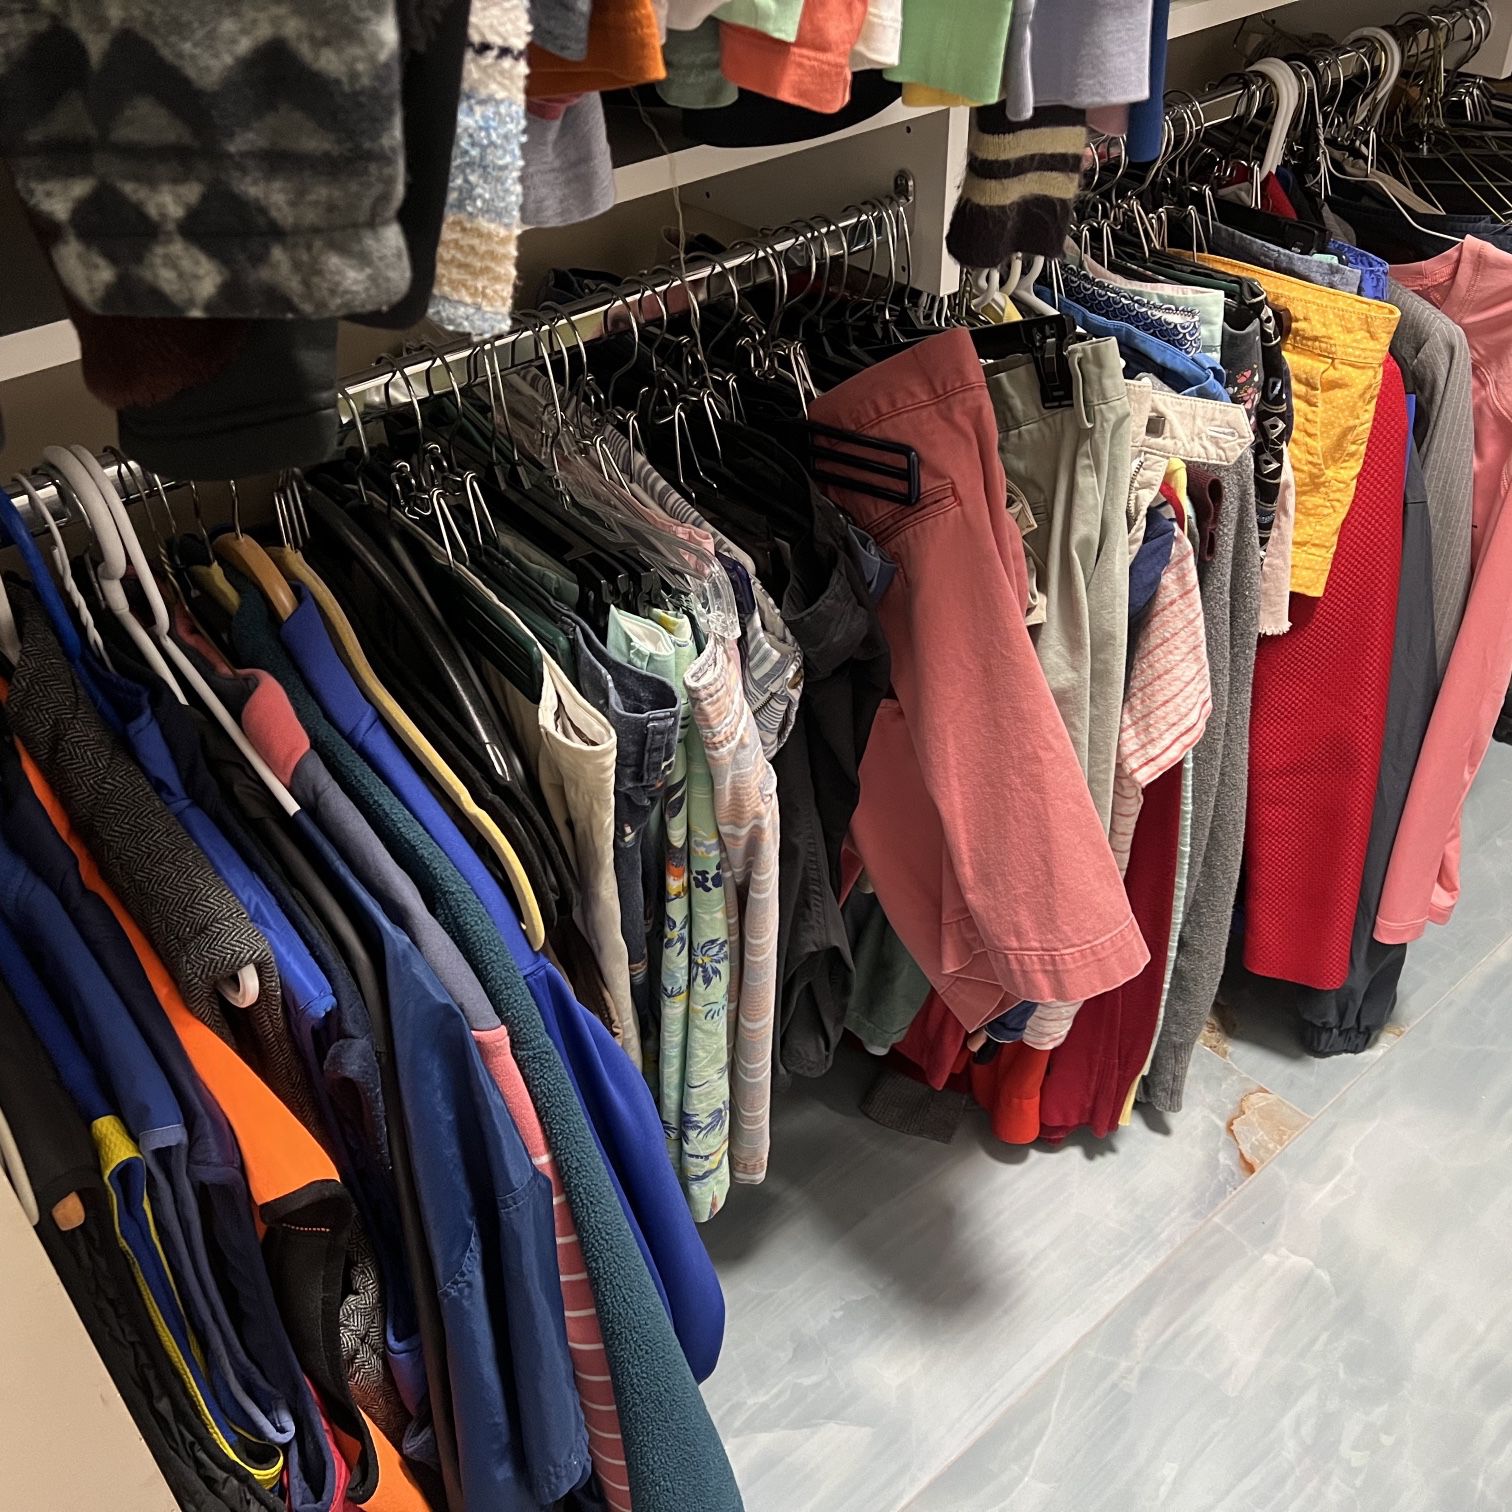 ***Weekend Pricing Special*** Men’s and Women’s Clothing Lot - Vineyard Vines, Ralph Lauren, Nike,  and More. 350 Pieces Total.